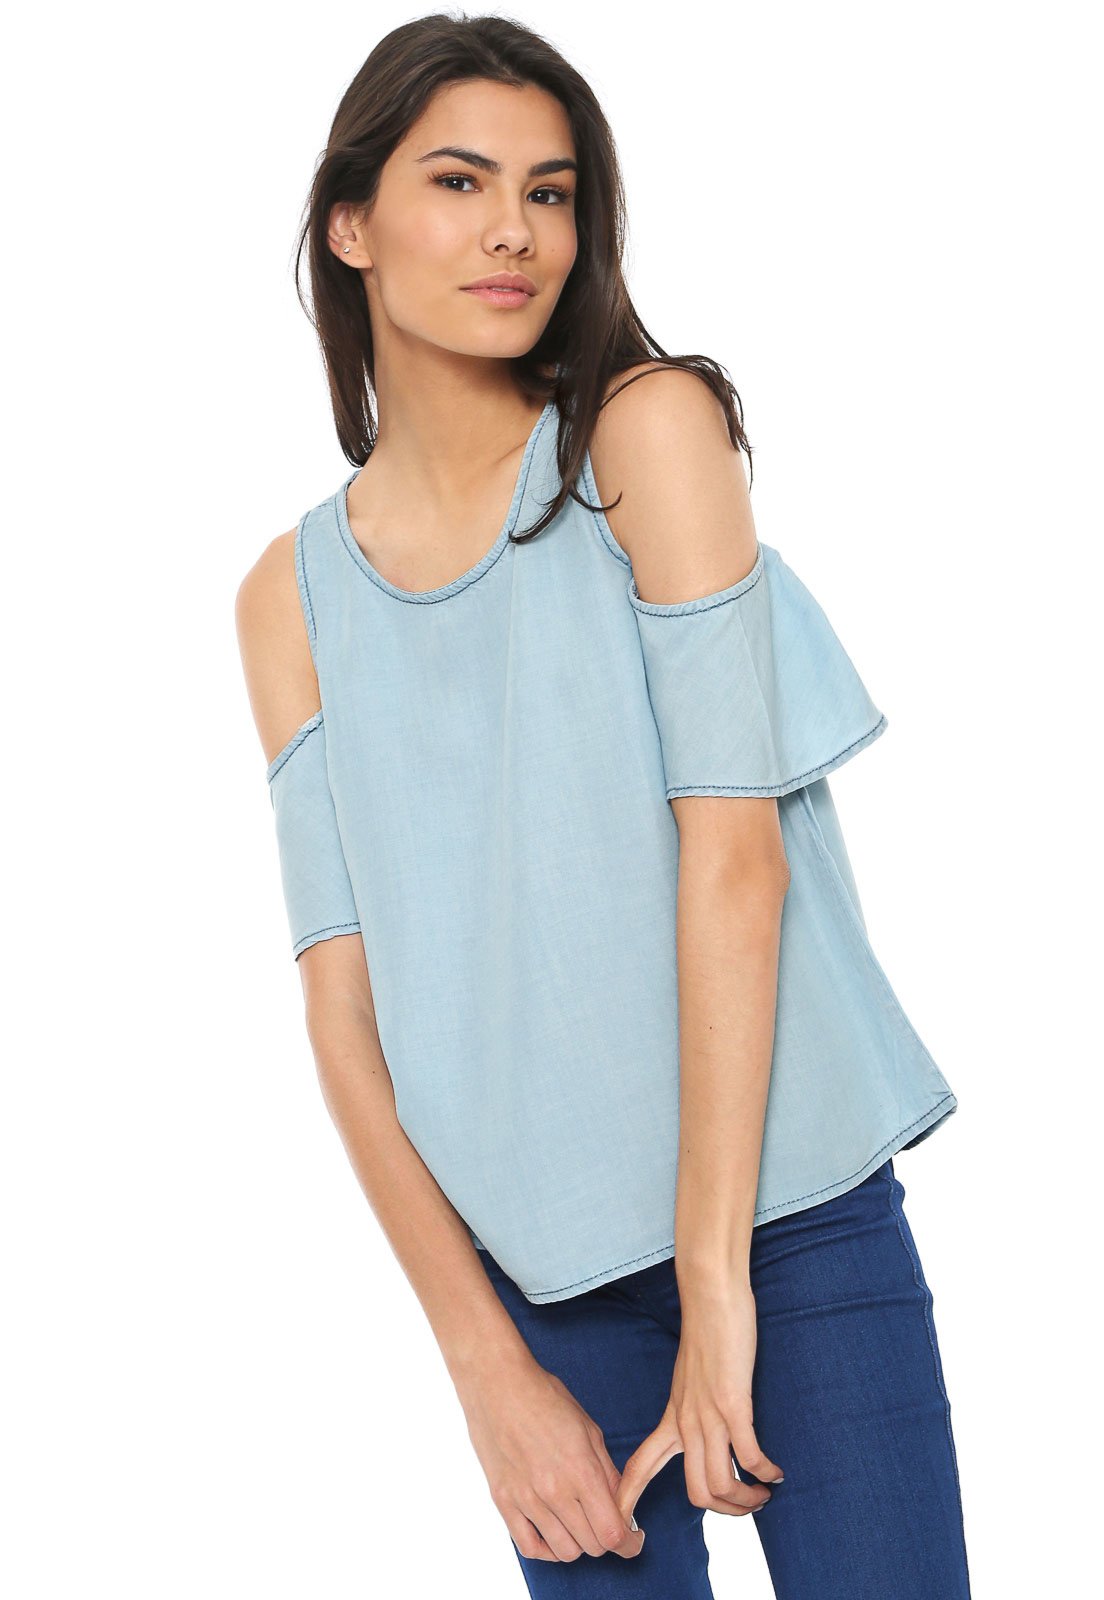 blusa jeans hering